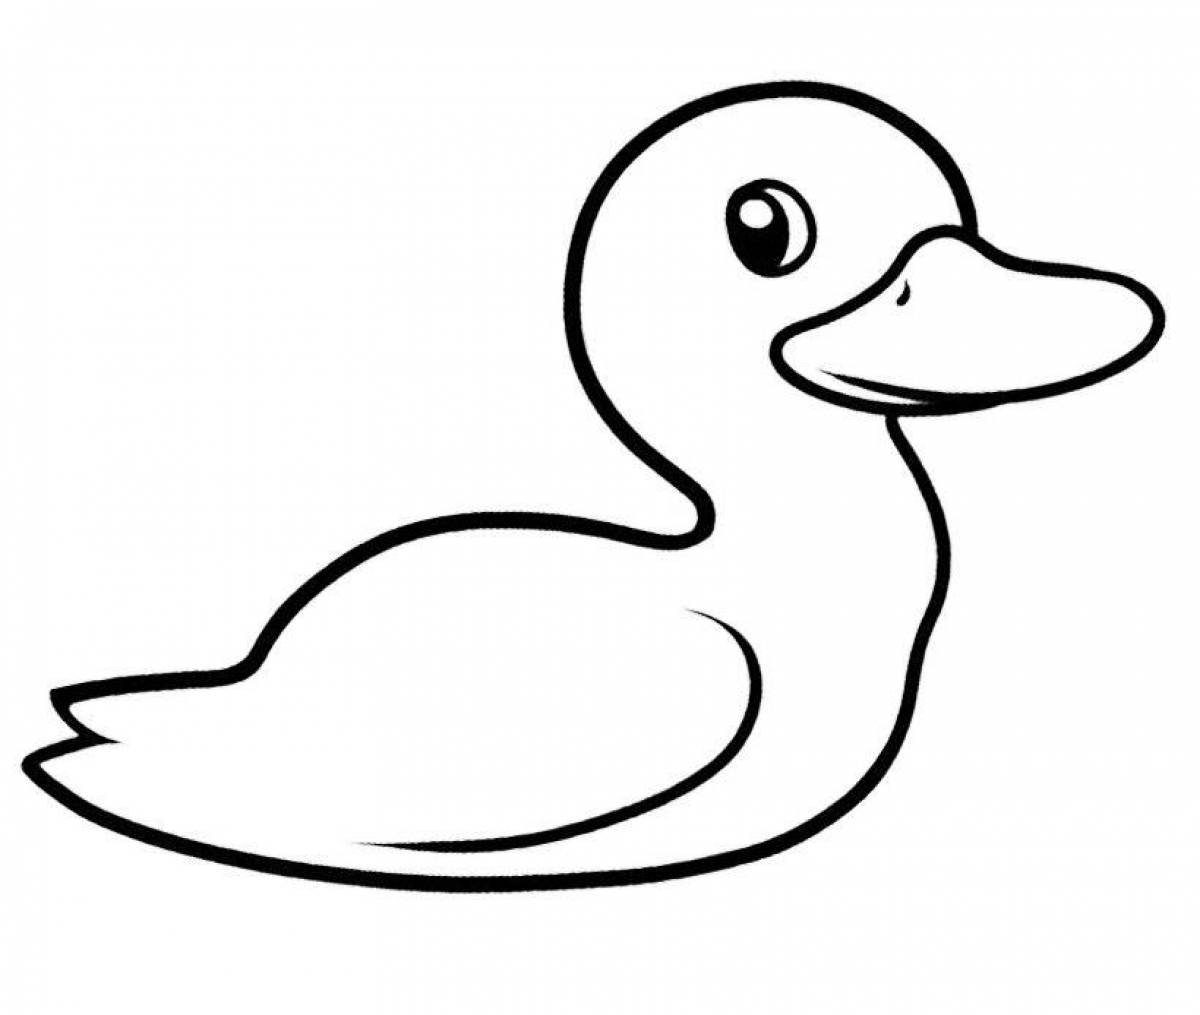 Lalafan nice duck coloring page